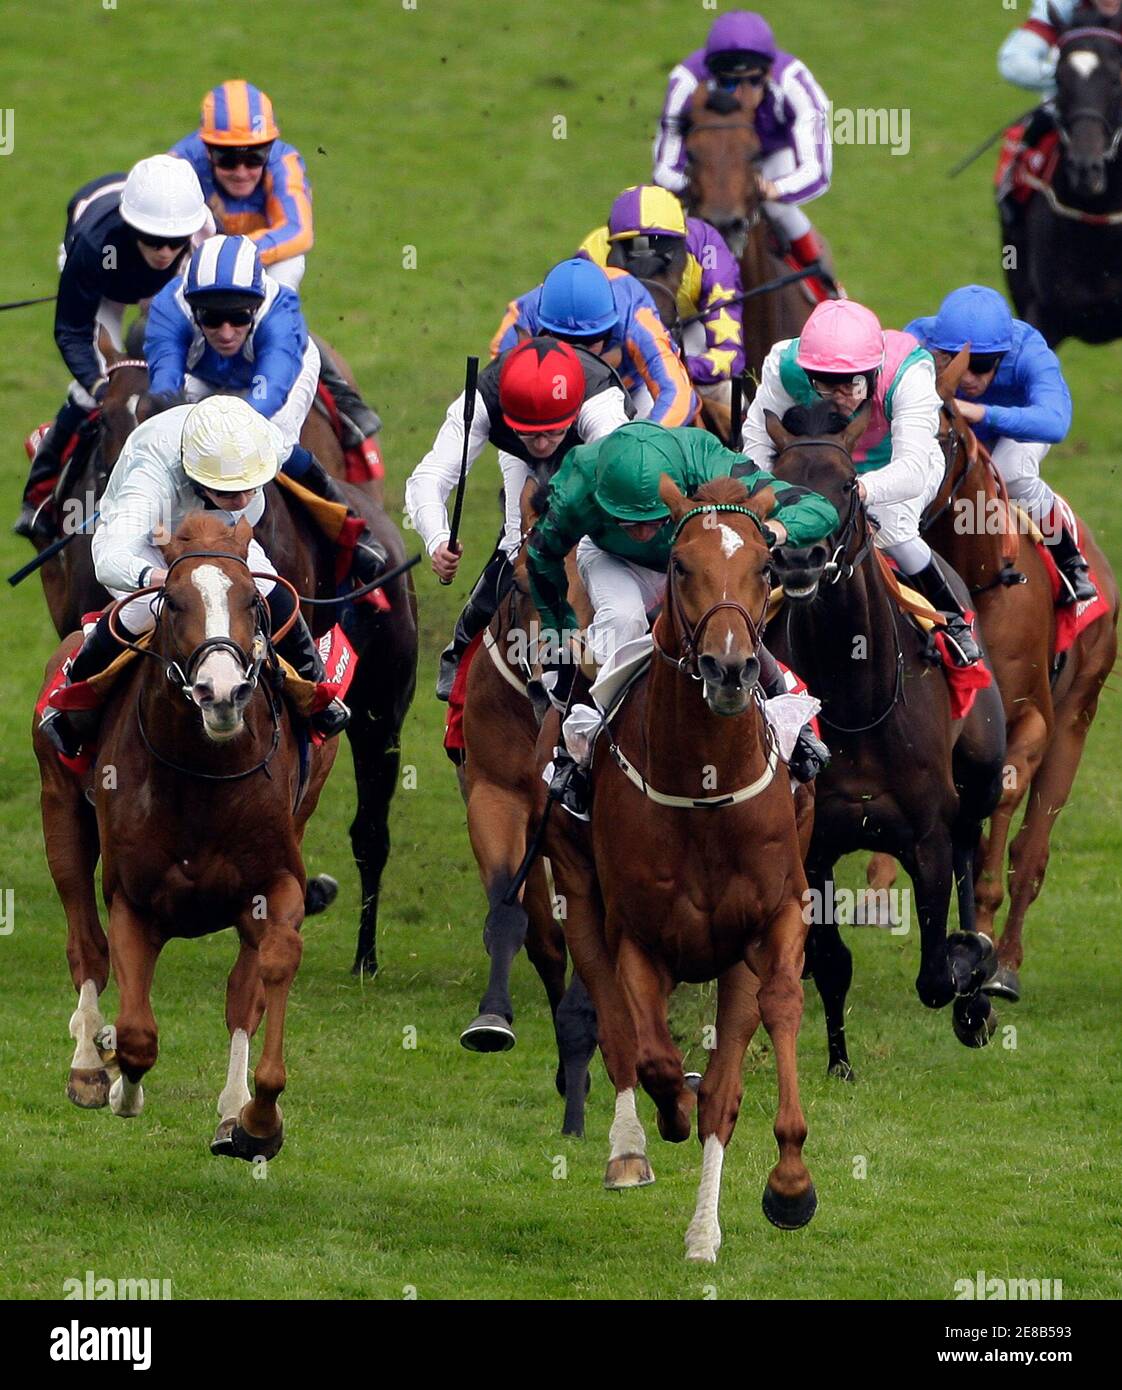 Winning rider Kevin Manning on New Approach (R) leads field in the Derby during the Epsom Derby Festival at Epsom Downs in Surrey, southern England June 7, 2008.    REUTERS/Darren Staples   (BRITAIN) Stock Photo